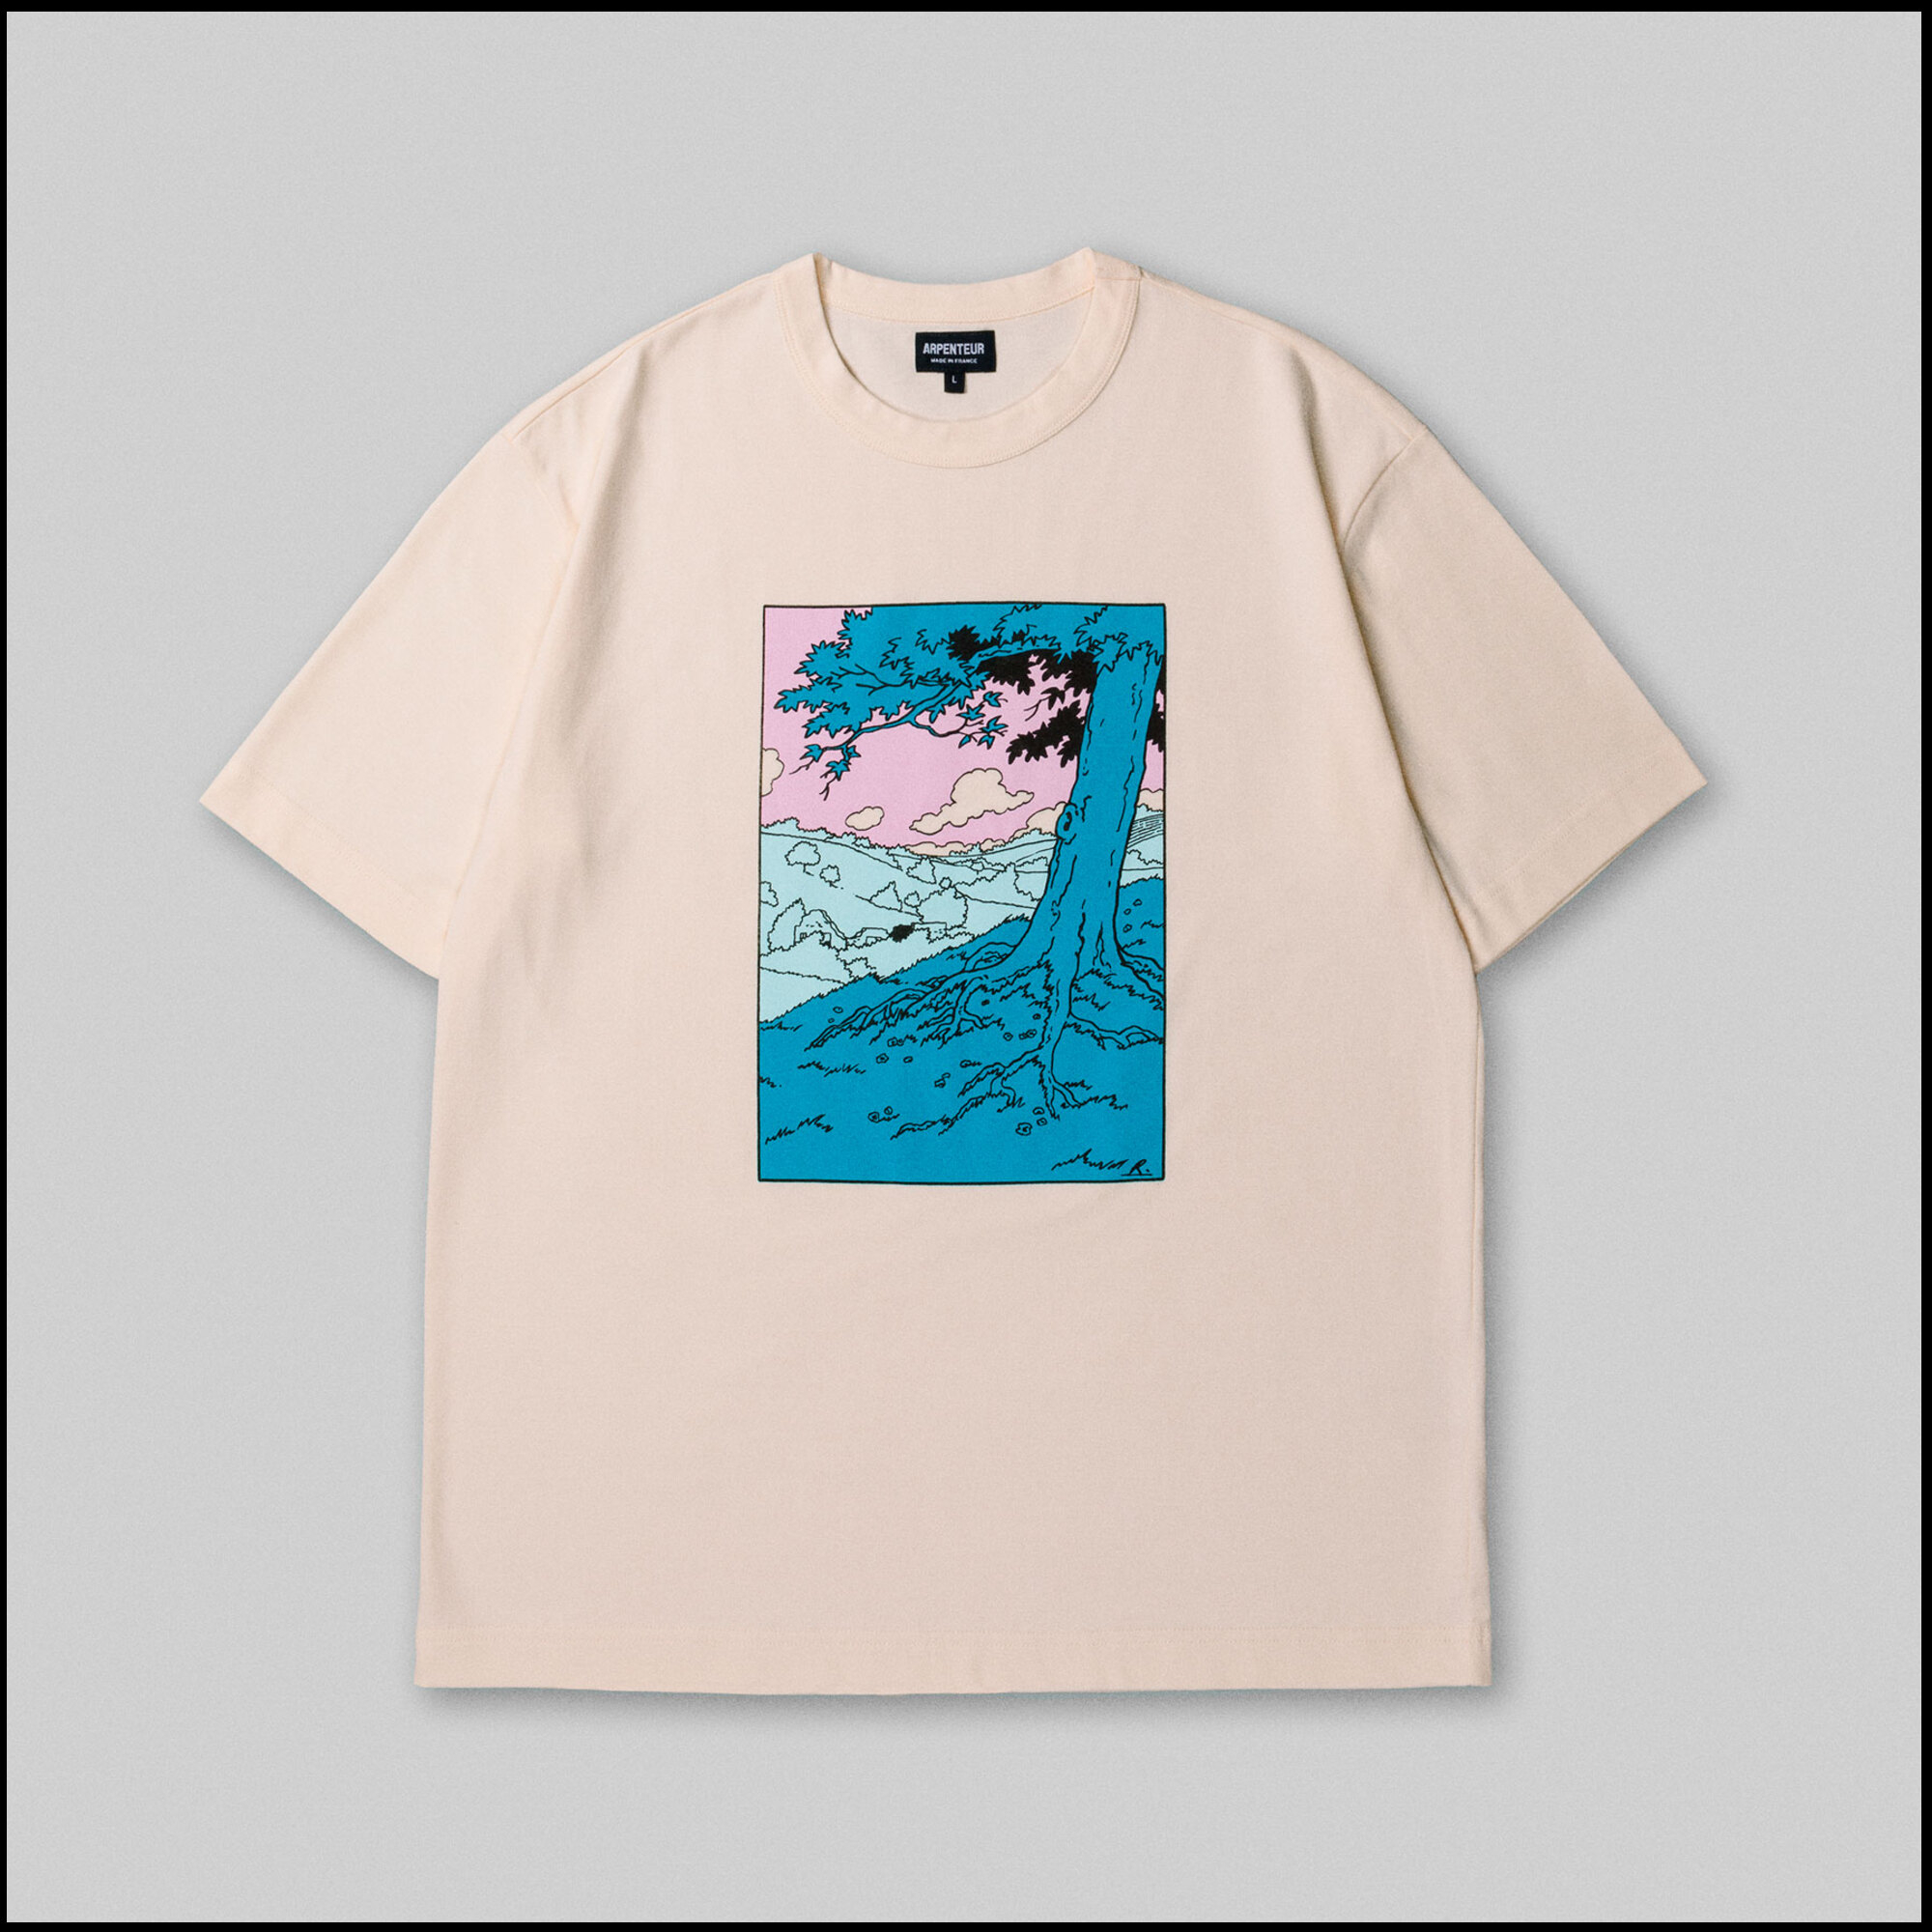 GRAPHIQUE T-shirt by Arpenteur in Pink sky color